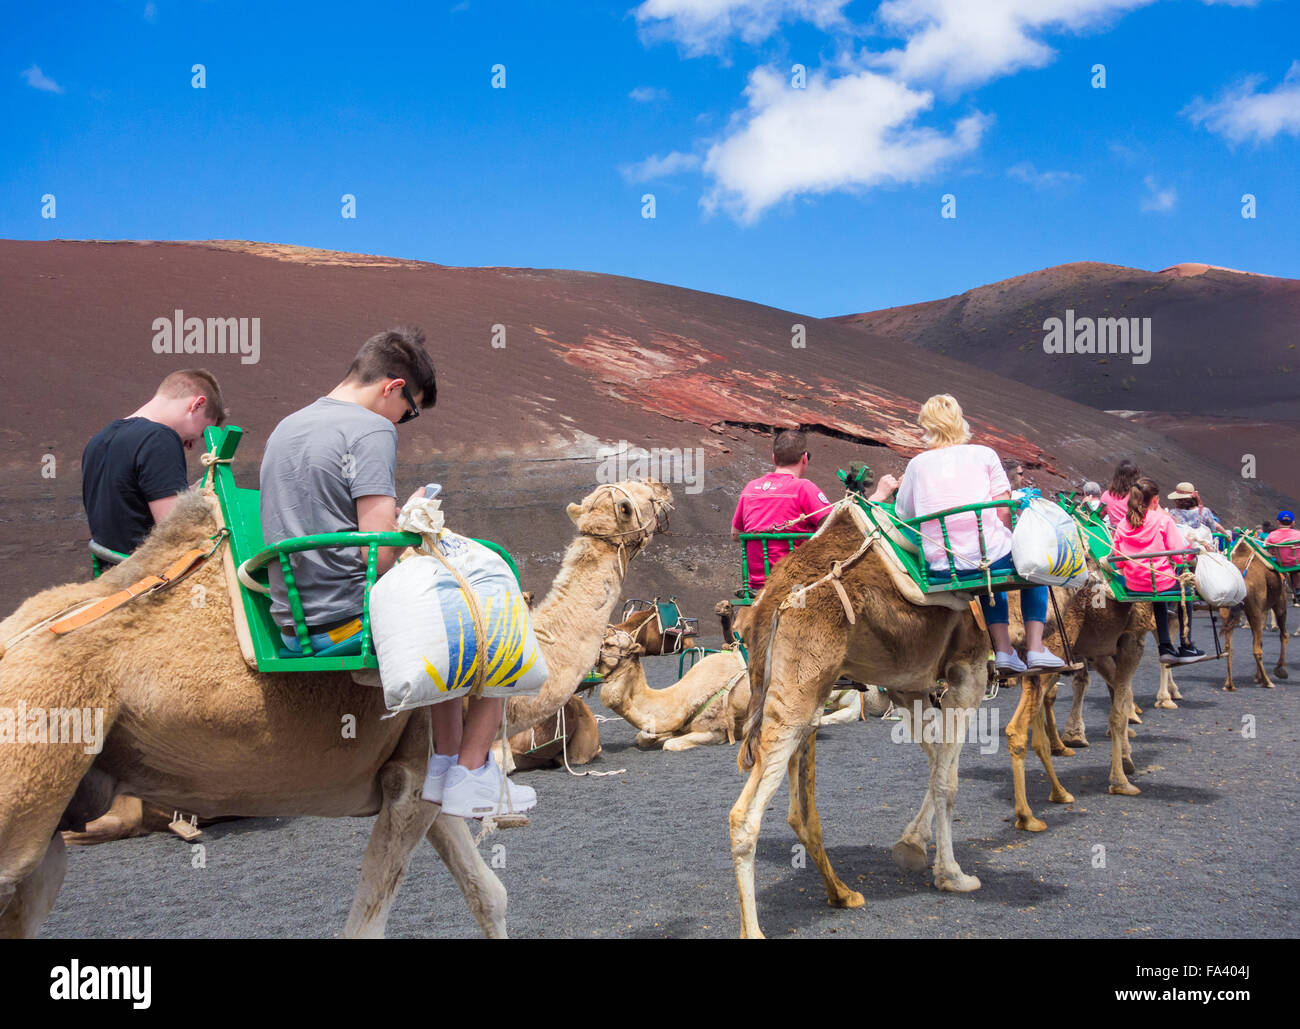 Two teenage boys looking at mobile phones on camel tour in Timanfaya national park. Lanzarote, Canary Islands, Spain Stock Photo